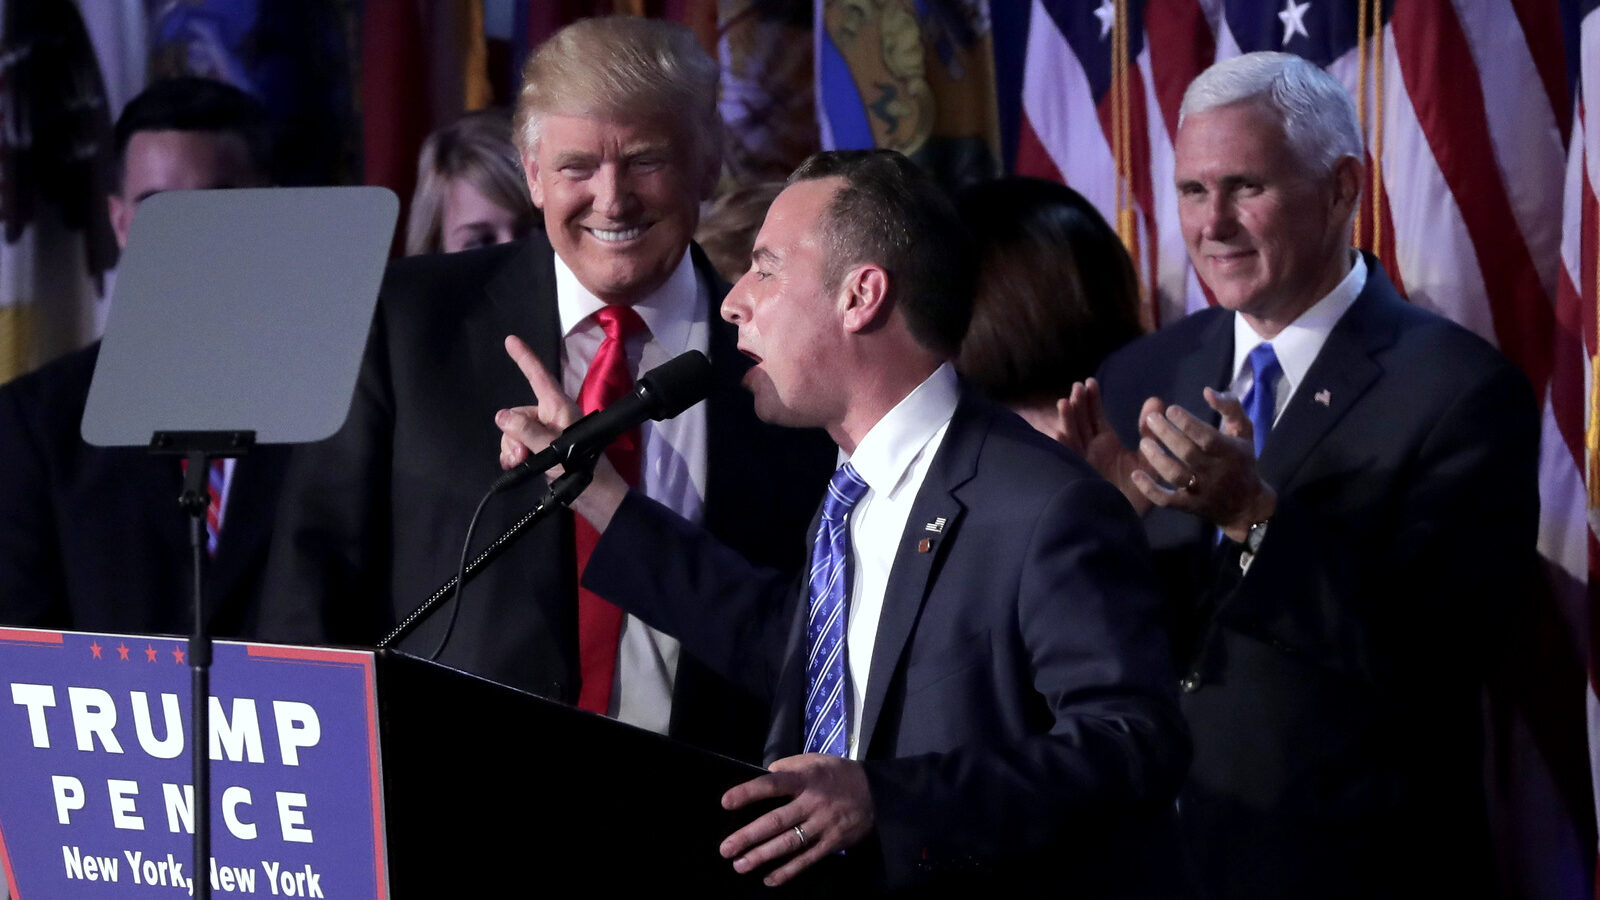 Reince Priebus, Chair of the Republican National Committee, right, speaks as President-elect Donald Trump gives his acceptance speech during his election night rally, Wednesday, Nov. 9, 2016, in New York. (AP/Julie Jacobson)